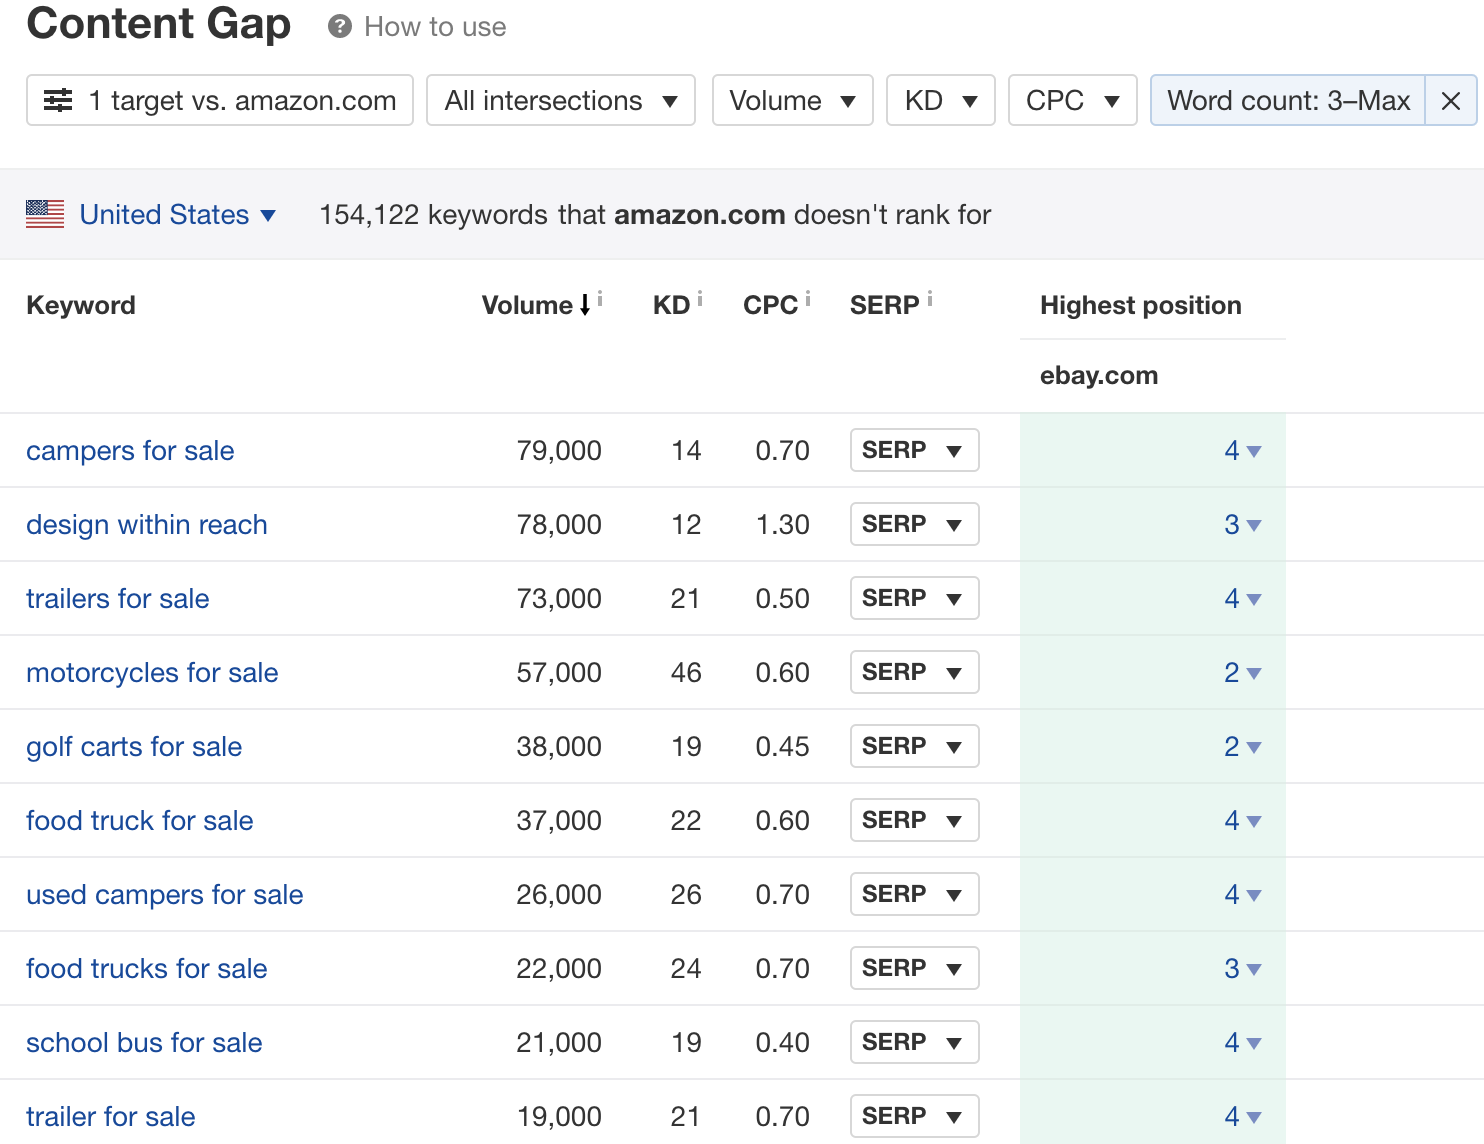 Competitor analysis using Ahref's content Gap to compare eBay’s keywords to Amazon’s